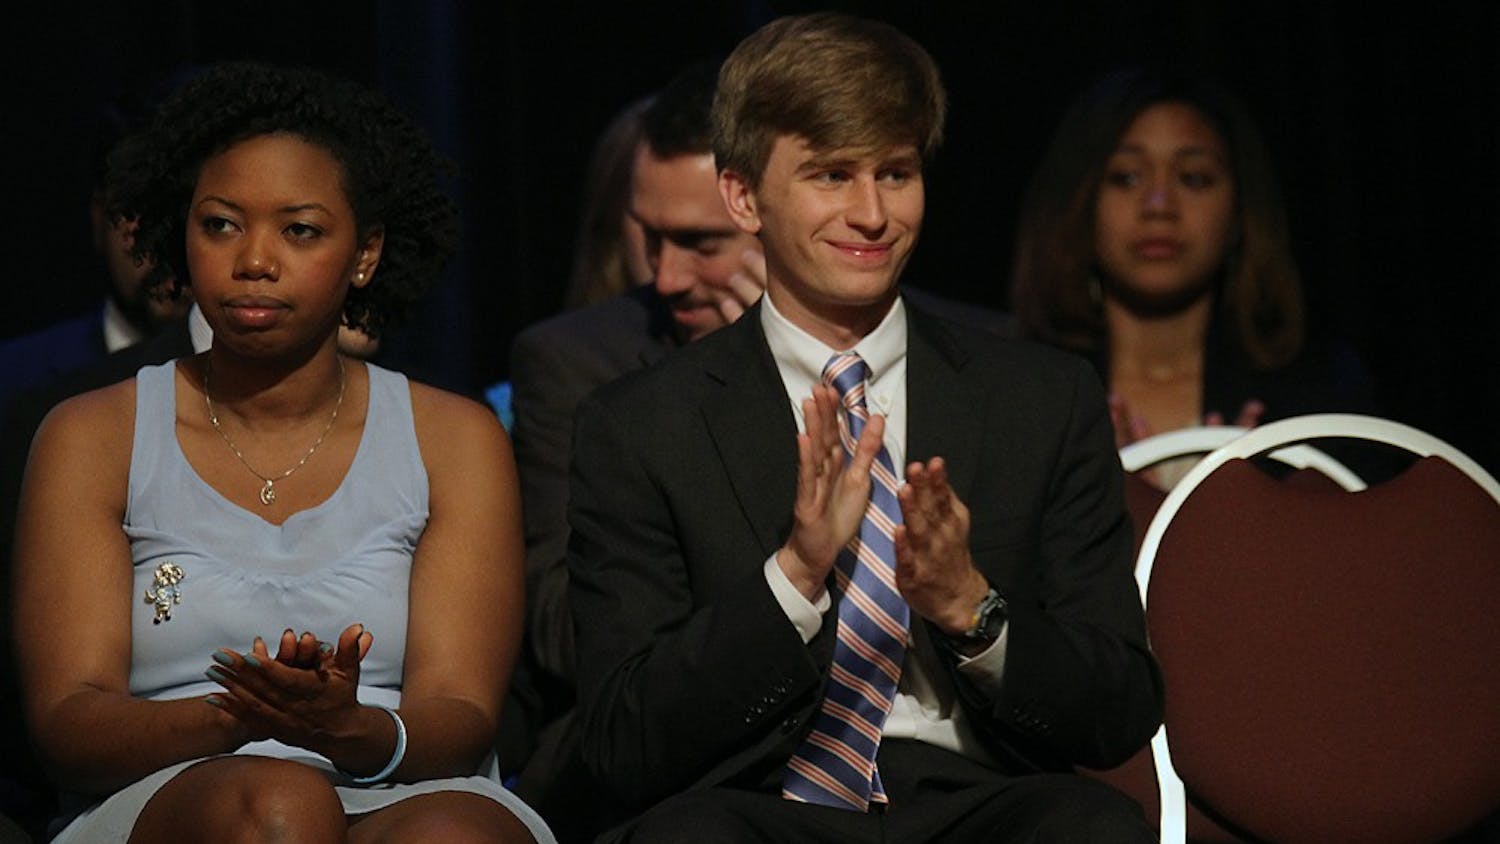 Andrew Powell was inaugurated as Student Body President on Tuesday. Student officers for 2014 were inaugurated in the Great Hall on Tuesday. 